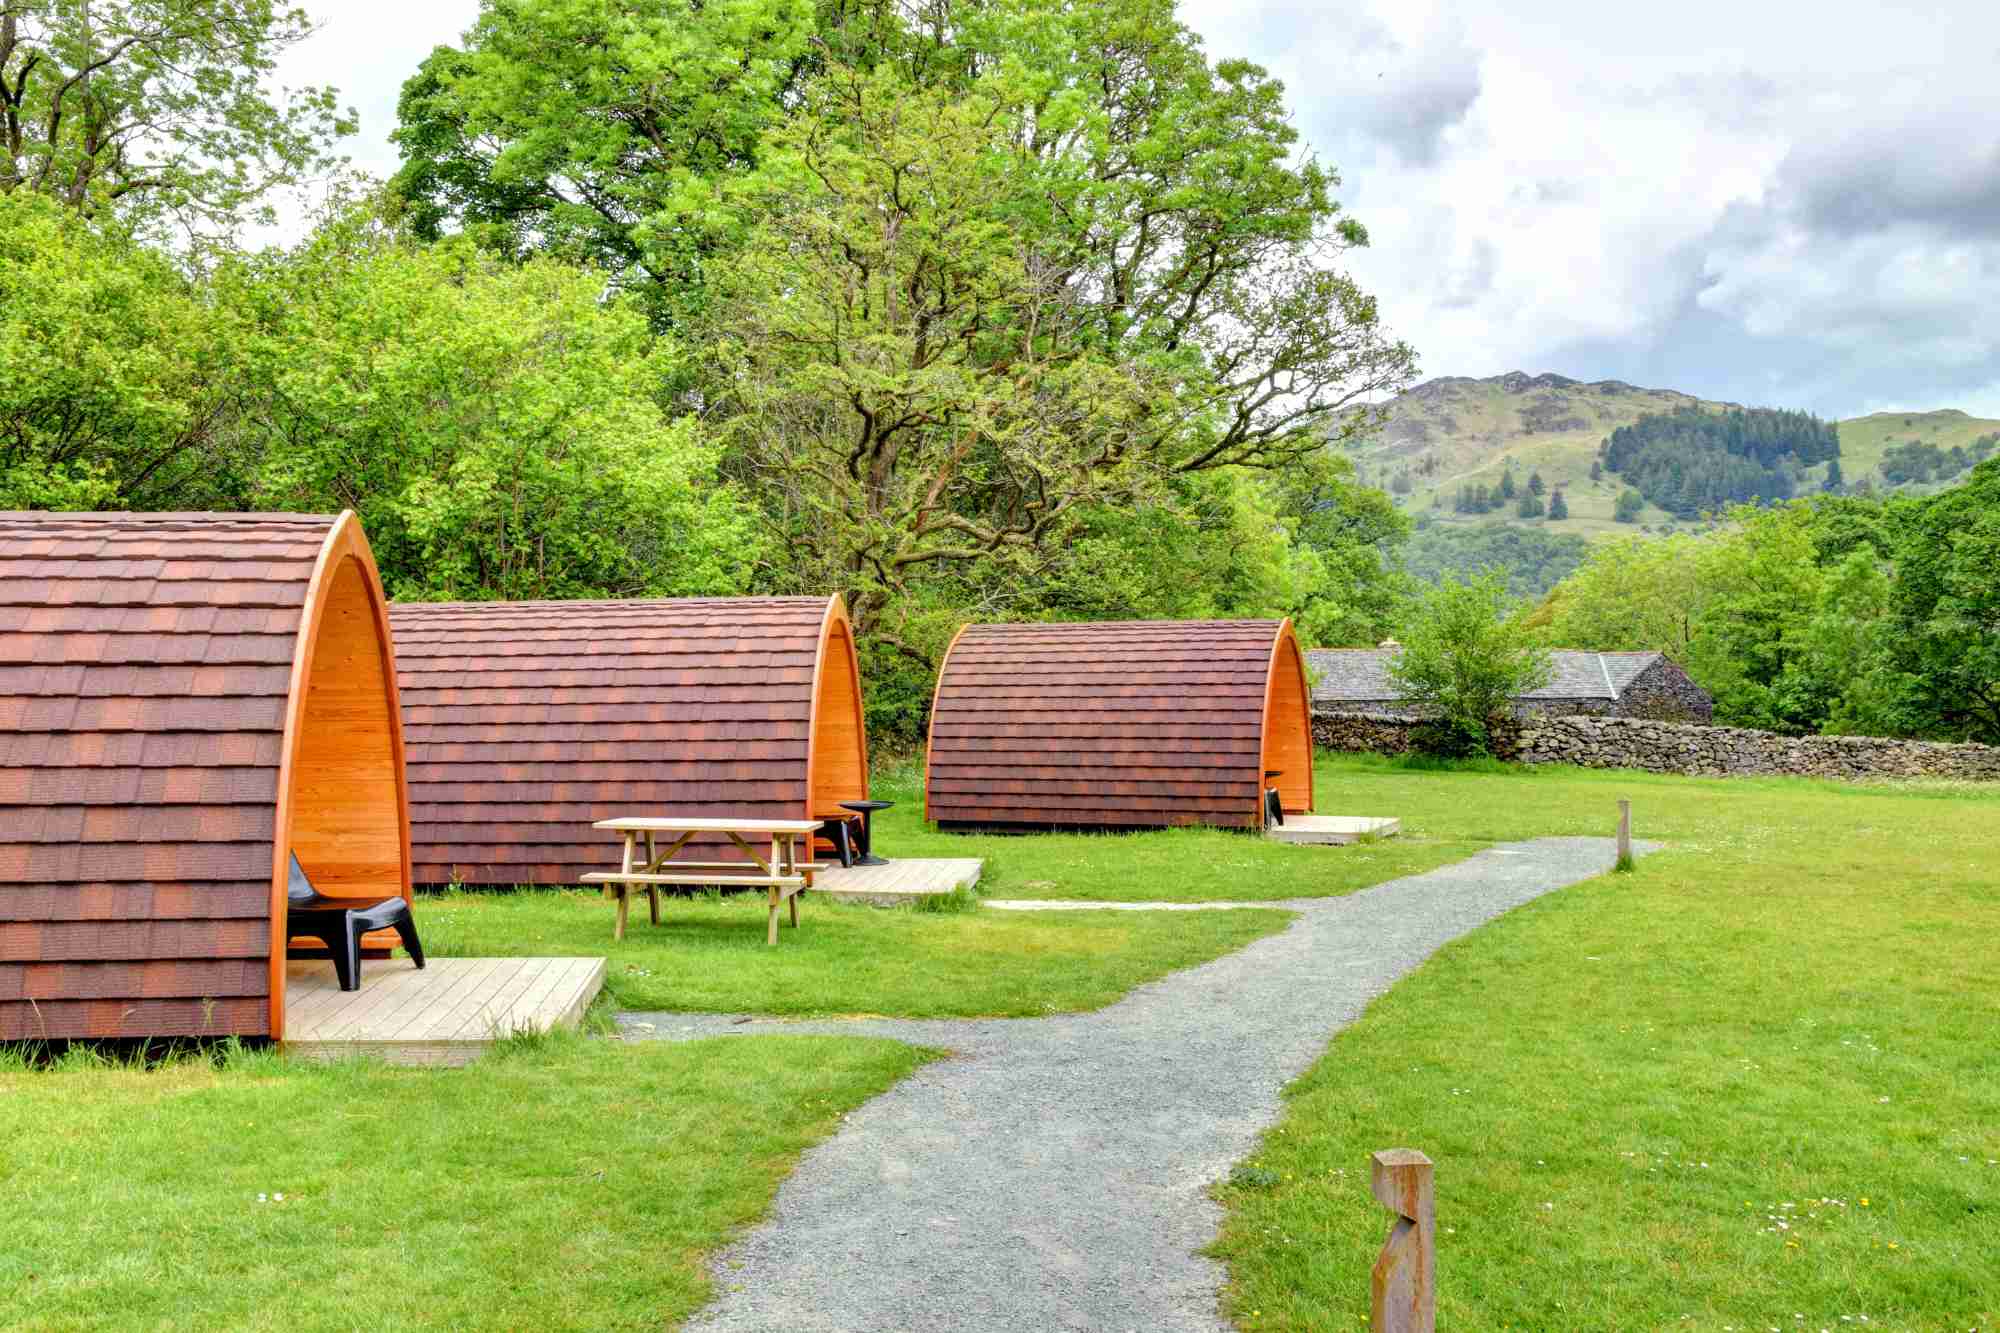 Camping pods at YHA Borrowdale